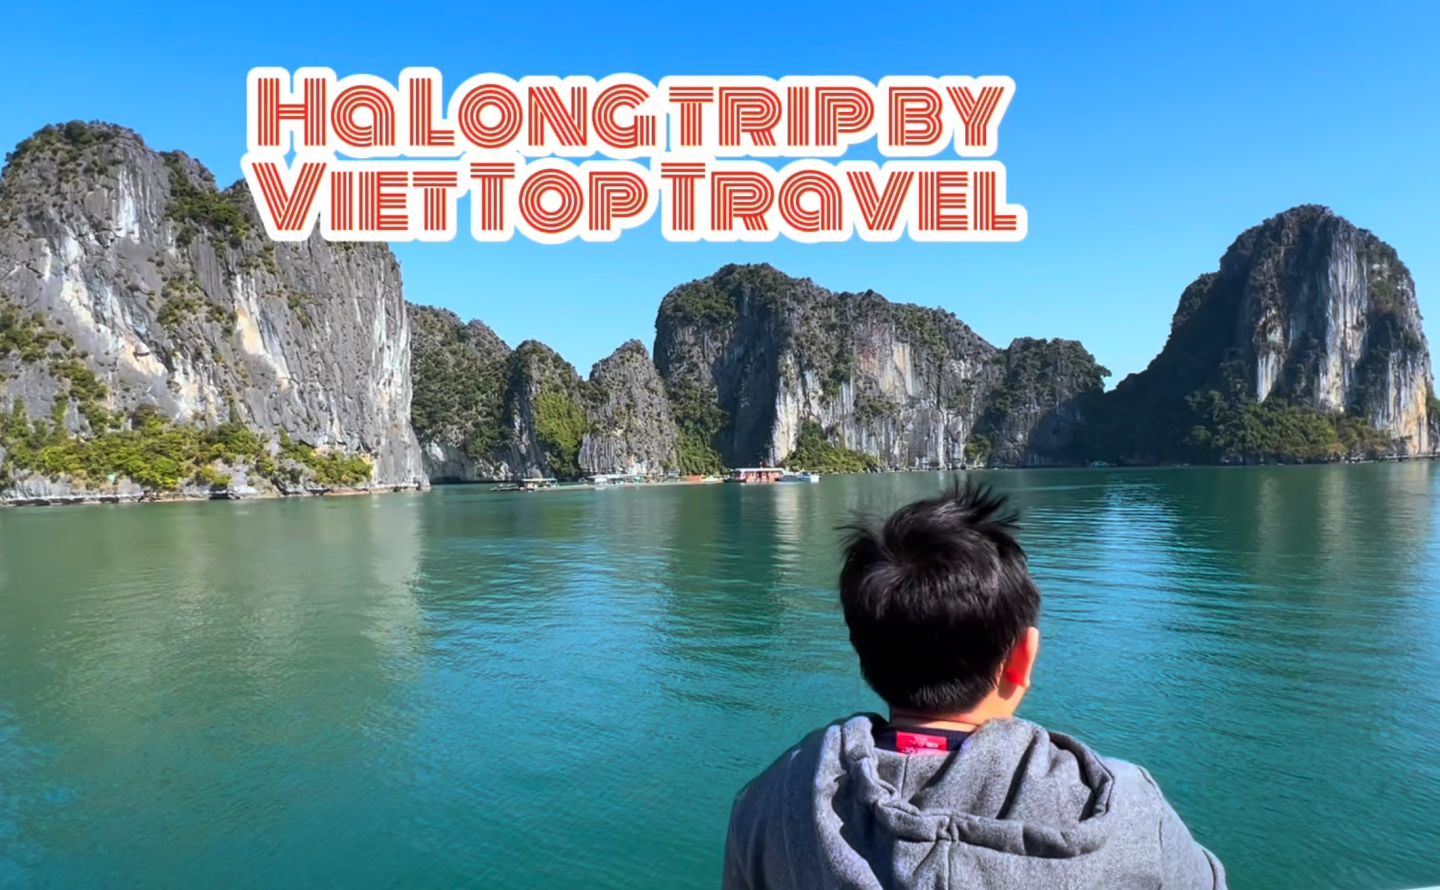 Halong bay trip by Viet Top Travel company